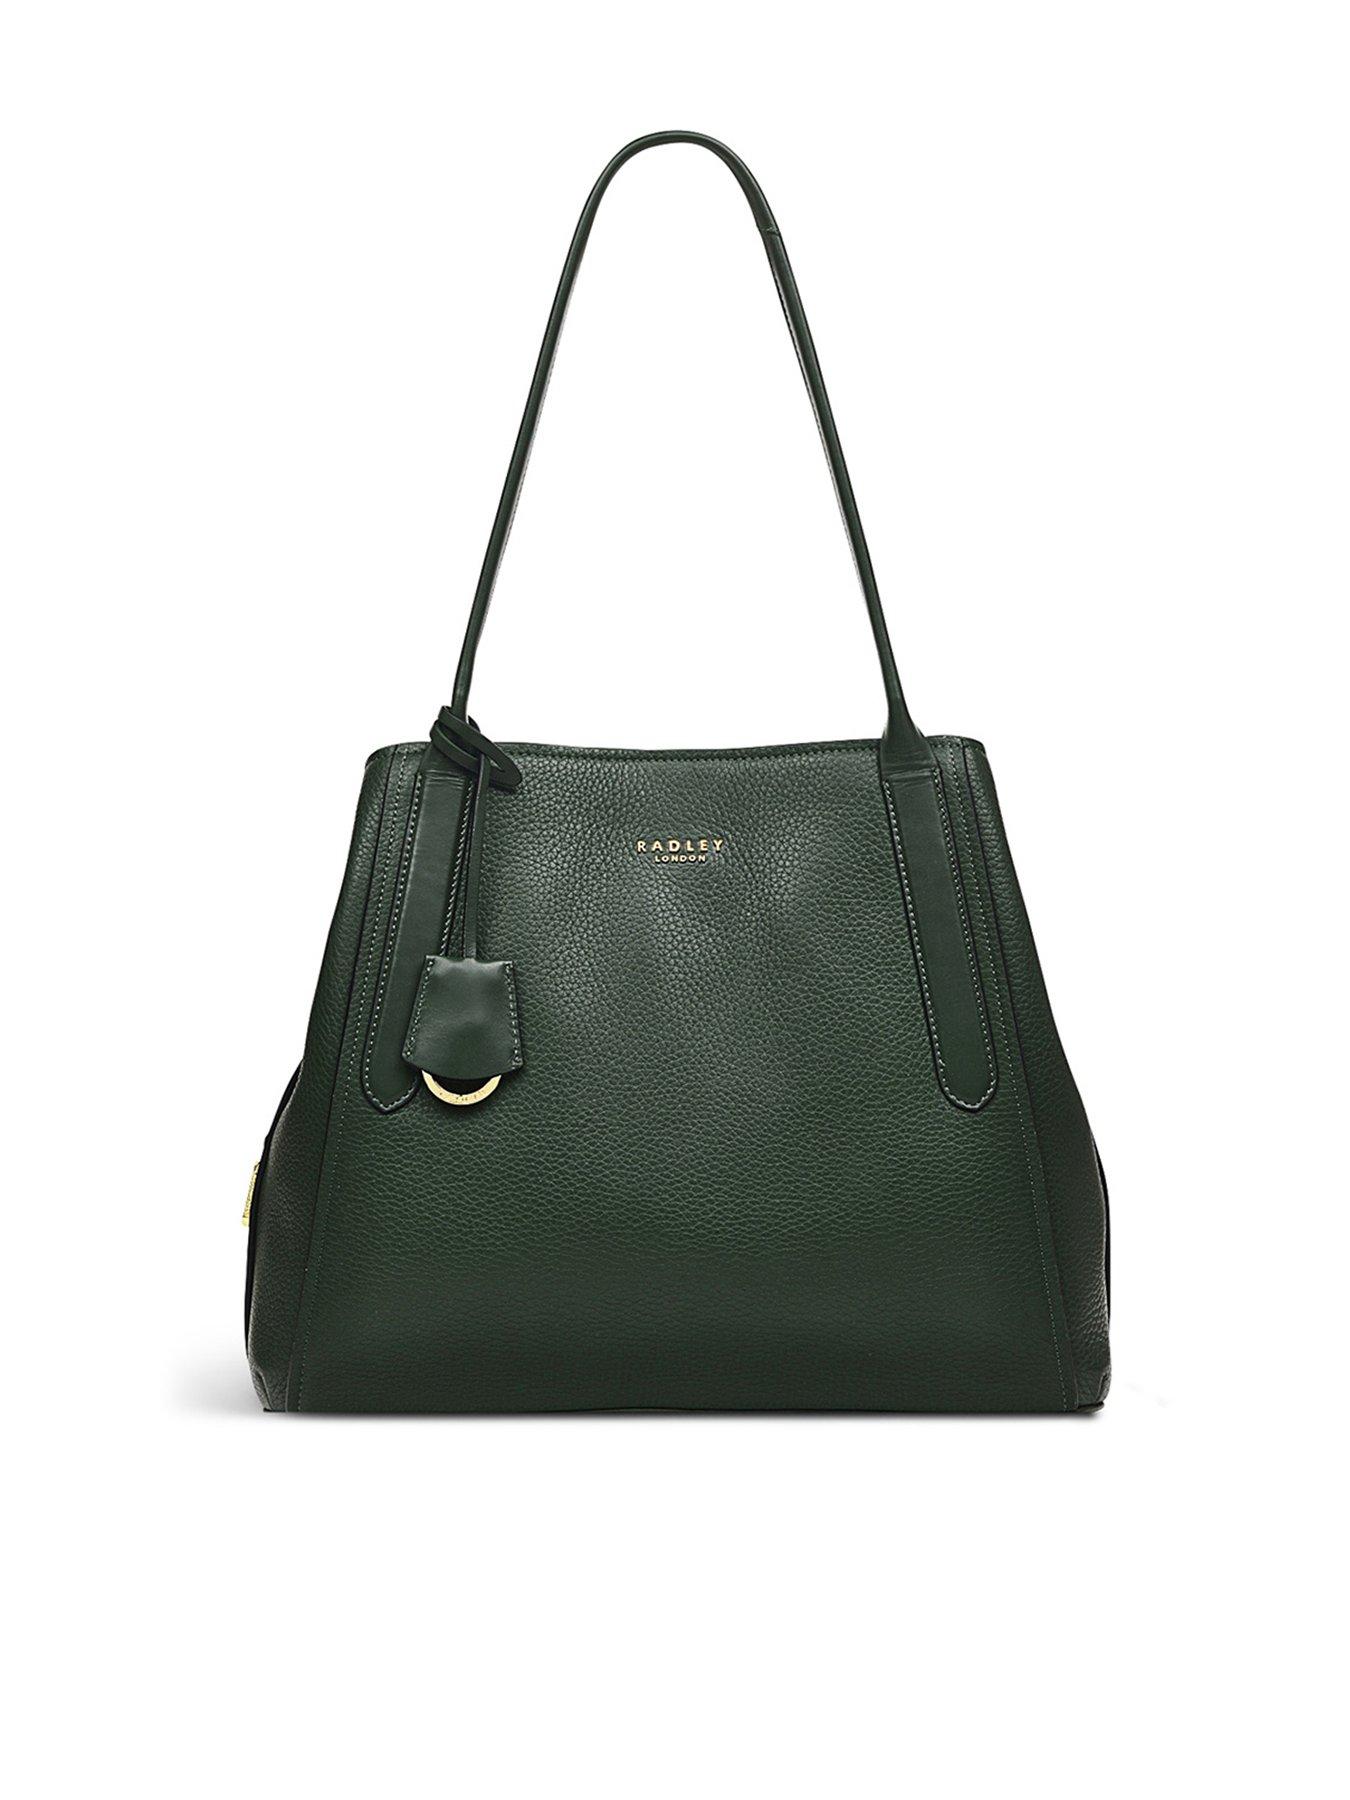 Radley London Evergreen Large Open Top Tote